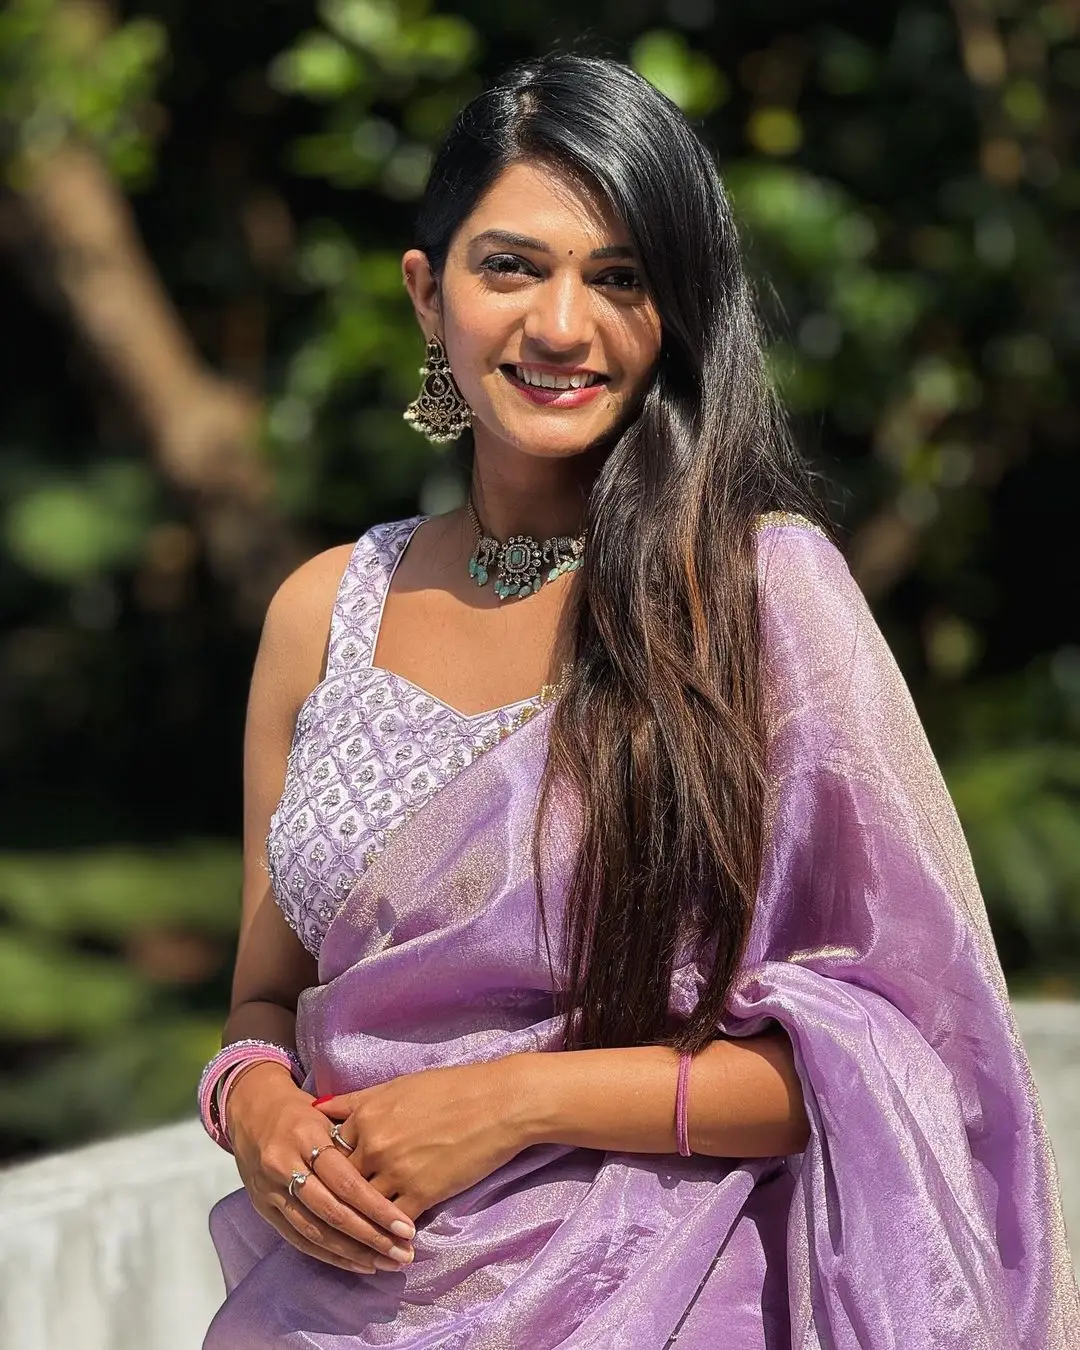 nisarga gowda in south indian traditional violet saree blouse